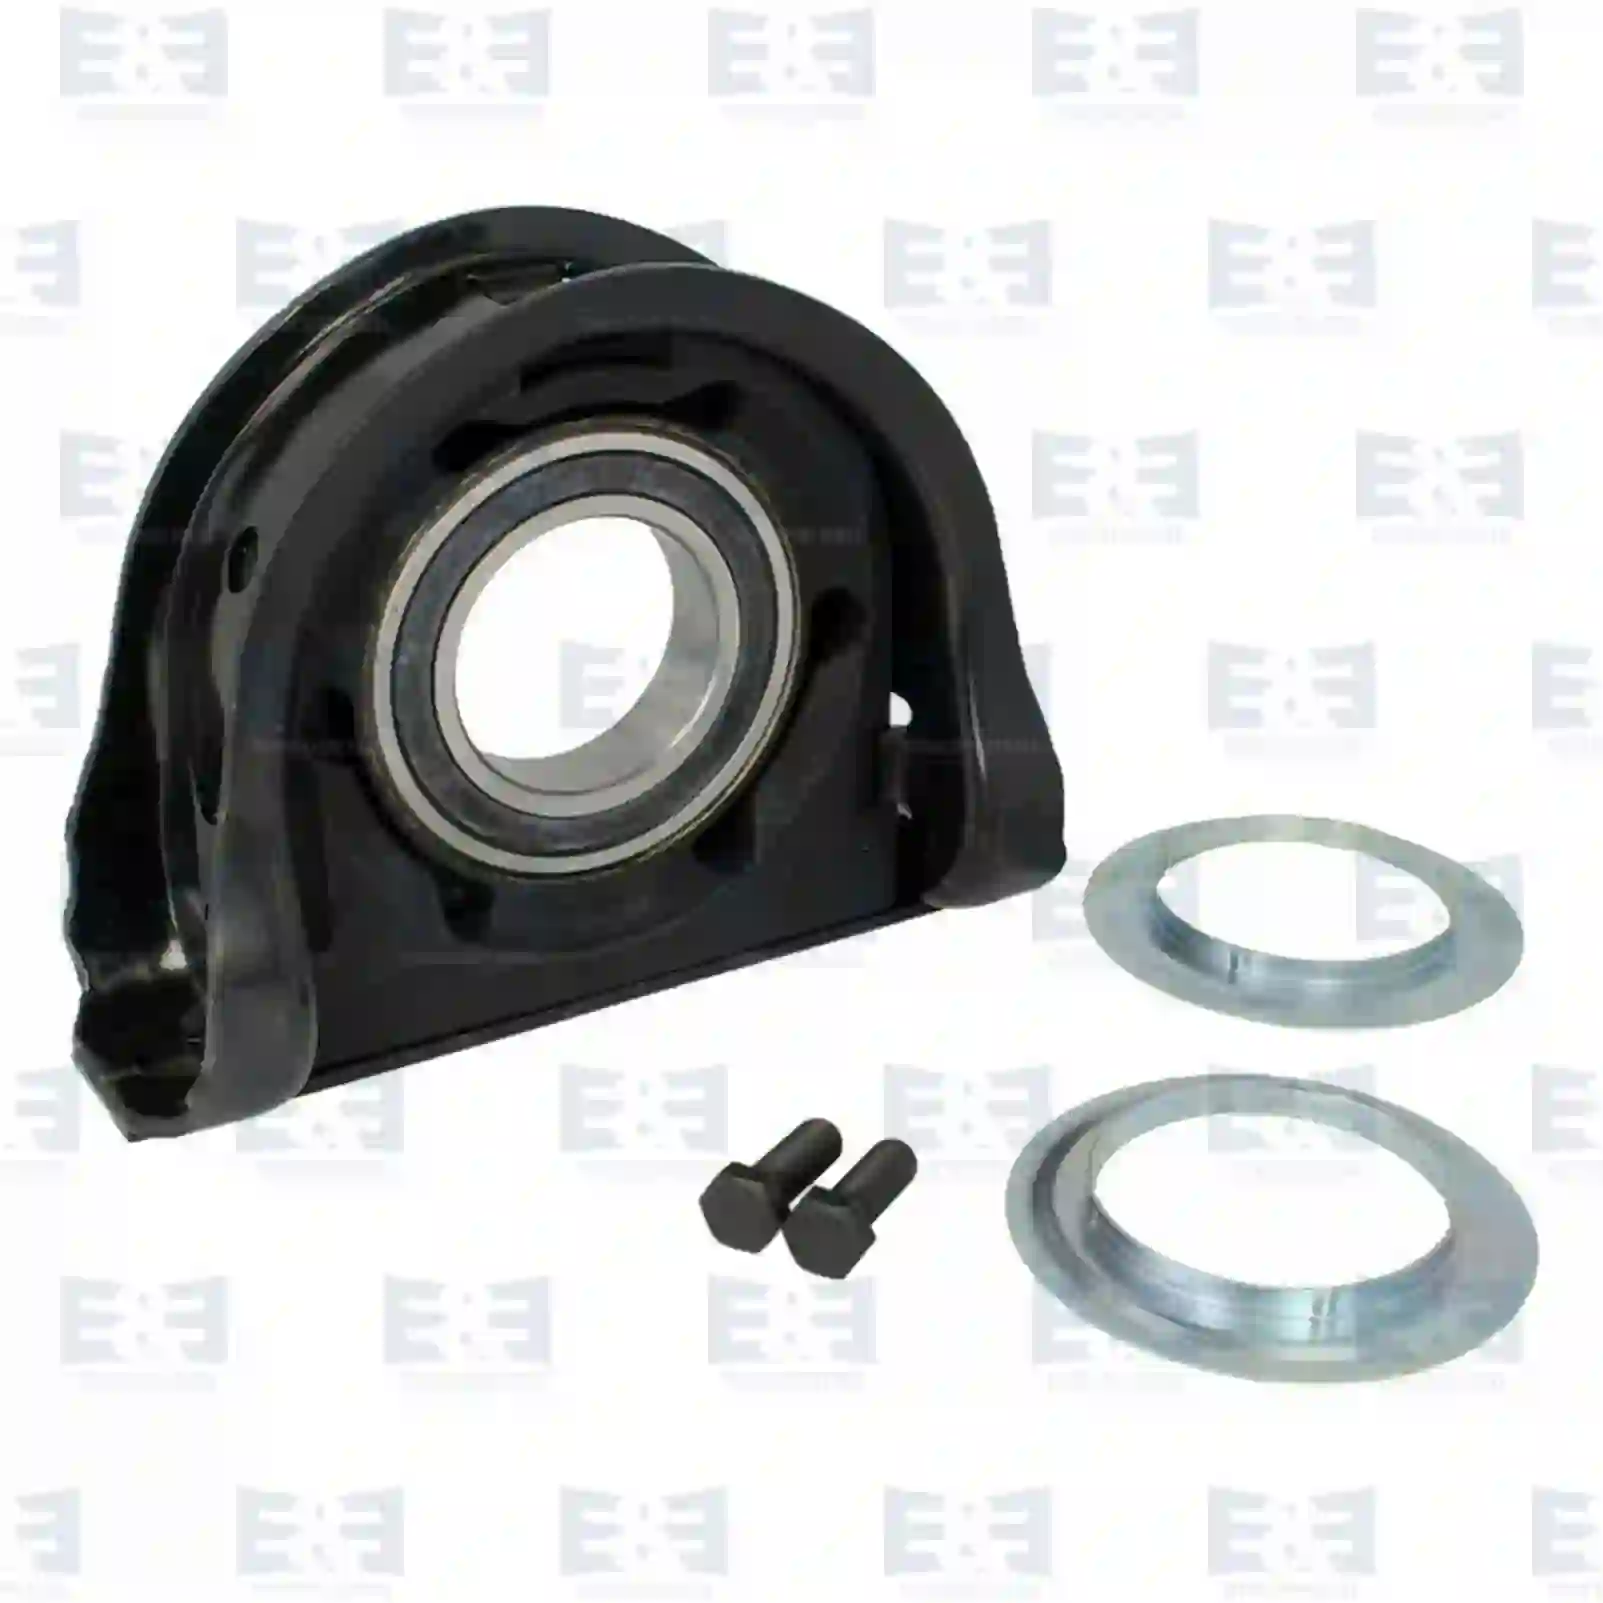 Support Bearing Center bearing, EE No 2E2276894 ,  oem no:21081171, ZG02476-0008 E&E Truck Spare Parts | Truck Spare Parts, Auotomotive Spare Parts